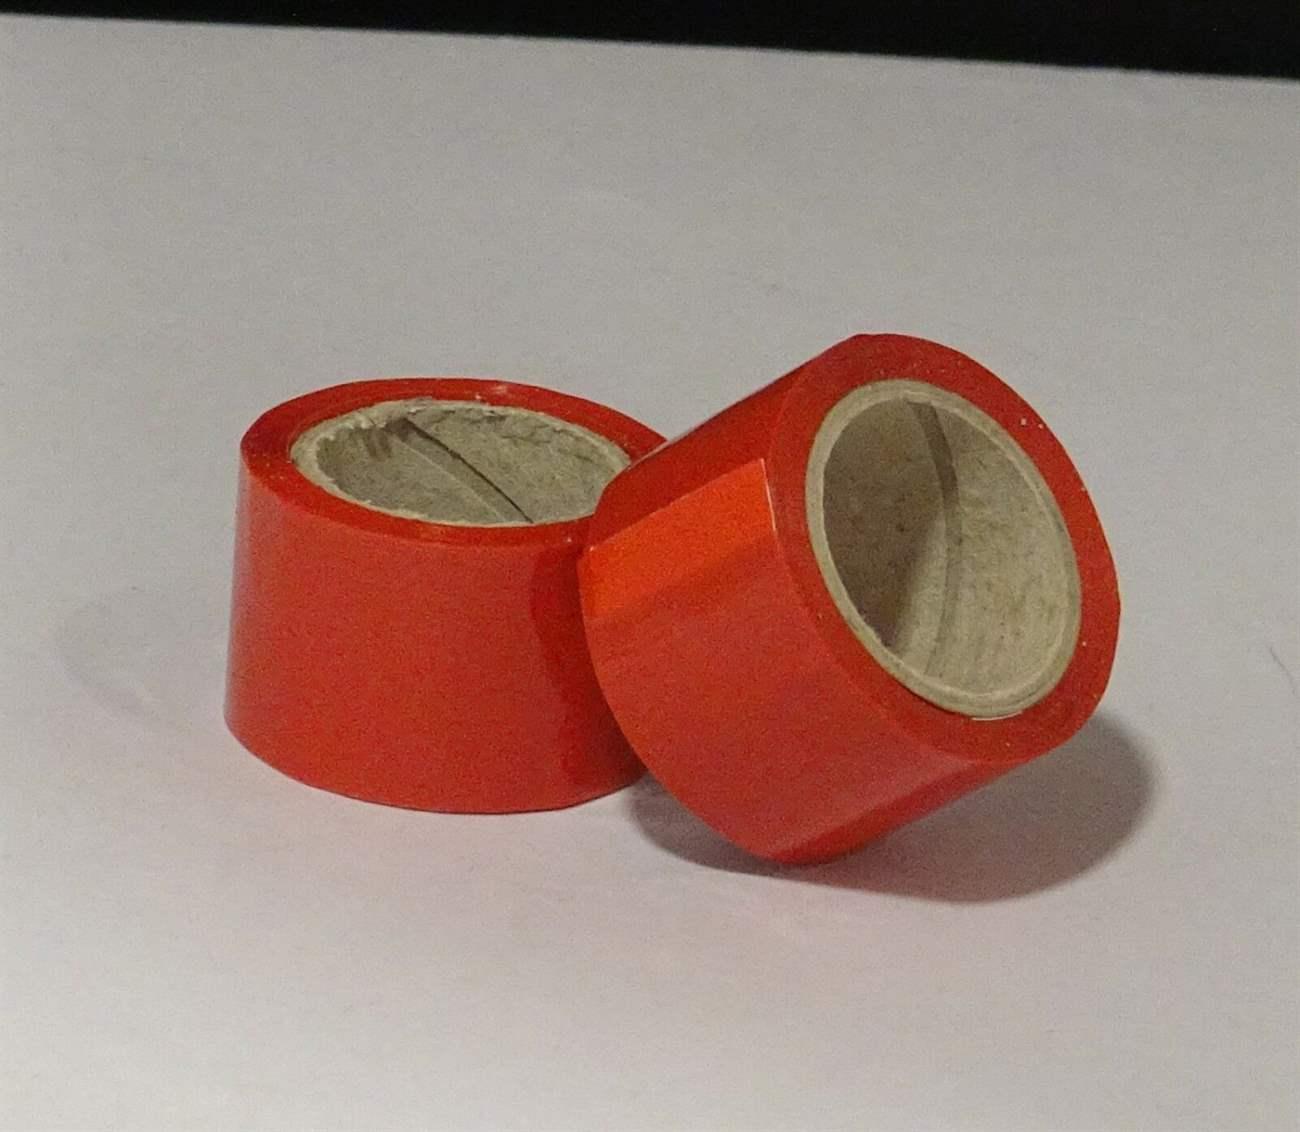 2 x RC Plane Glider medium Red Wing Repair & Cover Tape Strength Colour